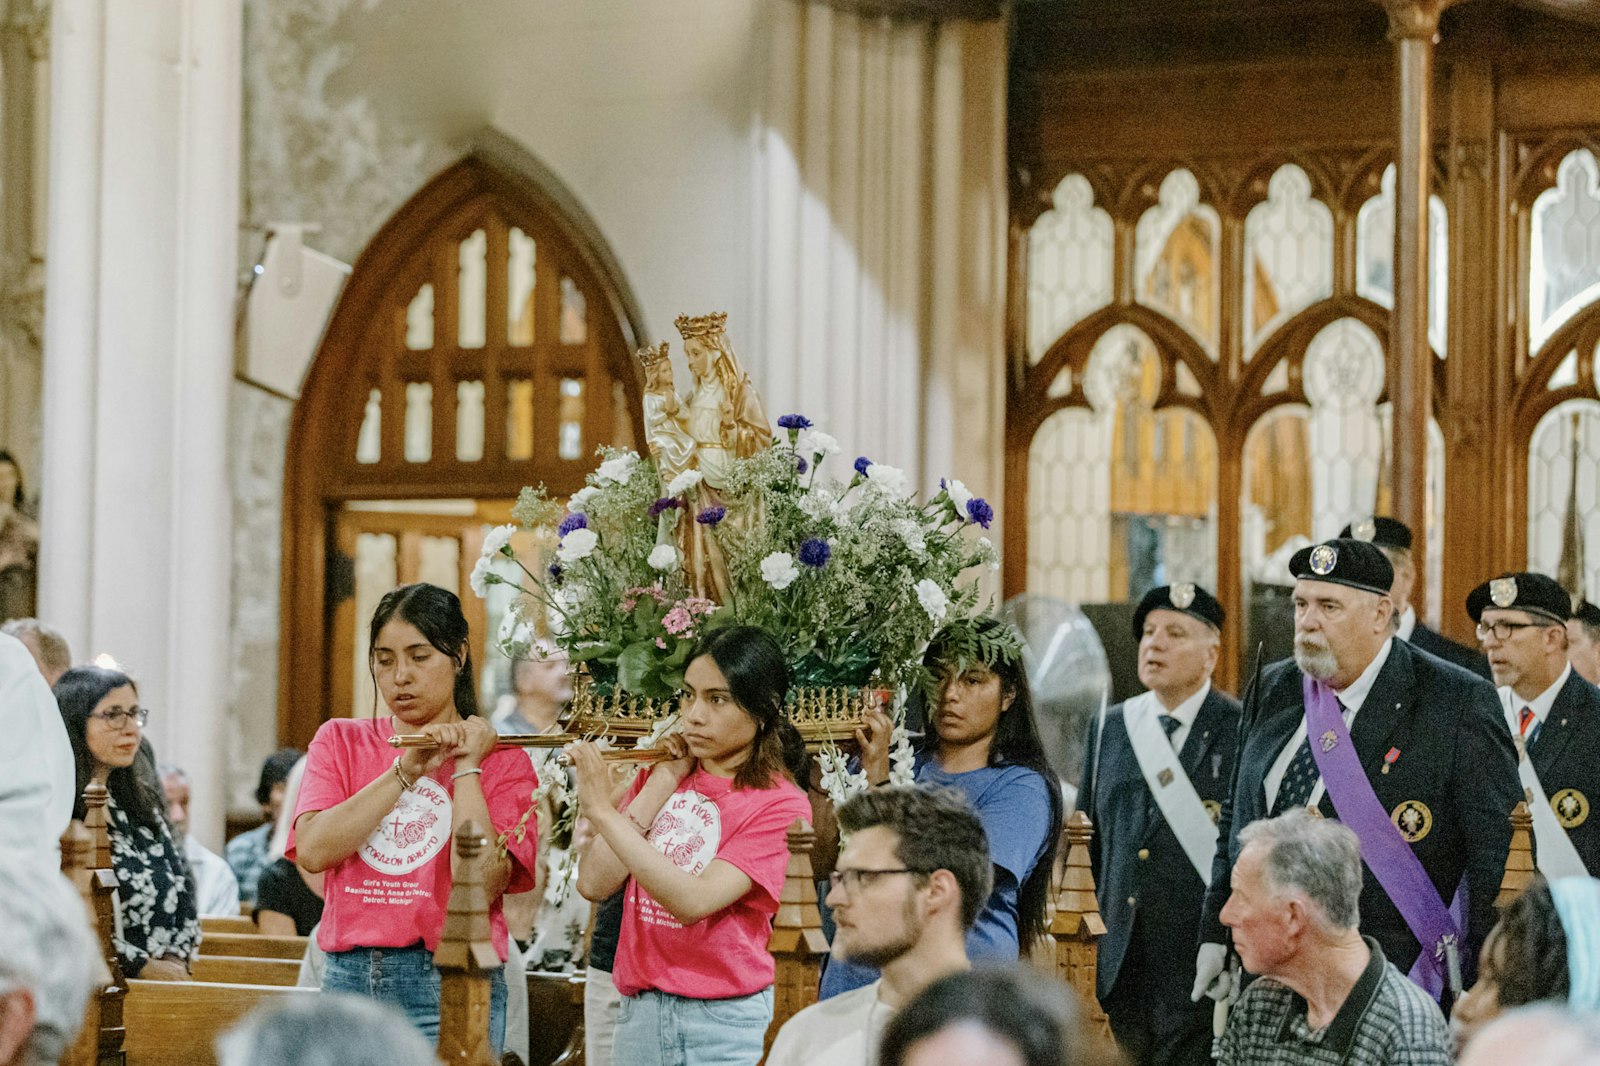 Parishioners carry a statue of St. Anne in procession during the start of Mass. After Mass, attendees had an opportunity to venerate a first-class relic of the grandmother of Jesus.